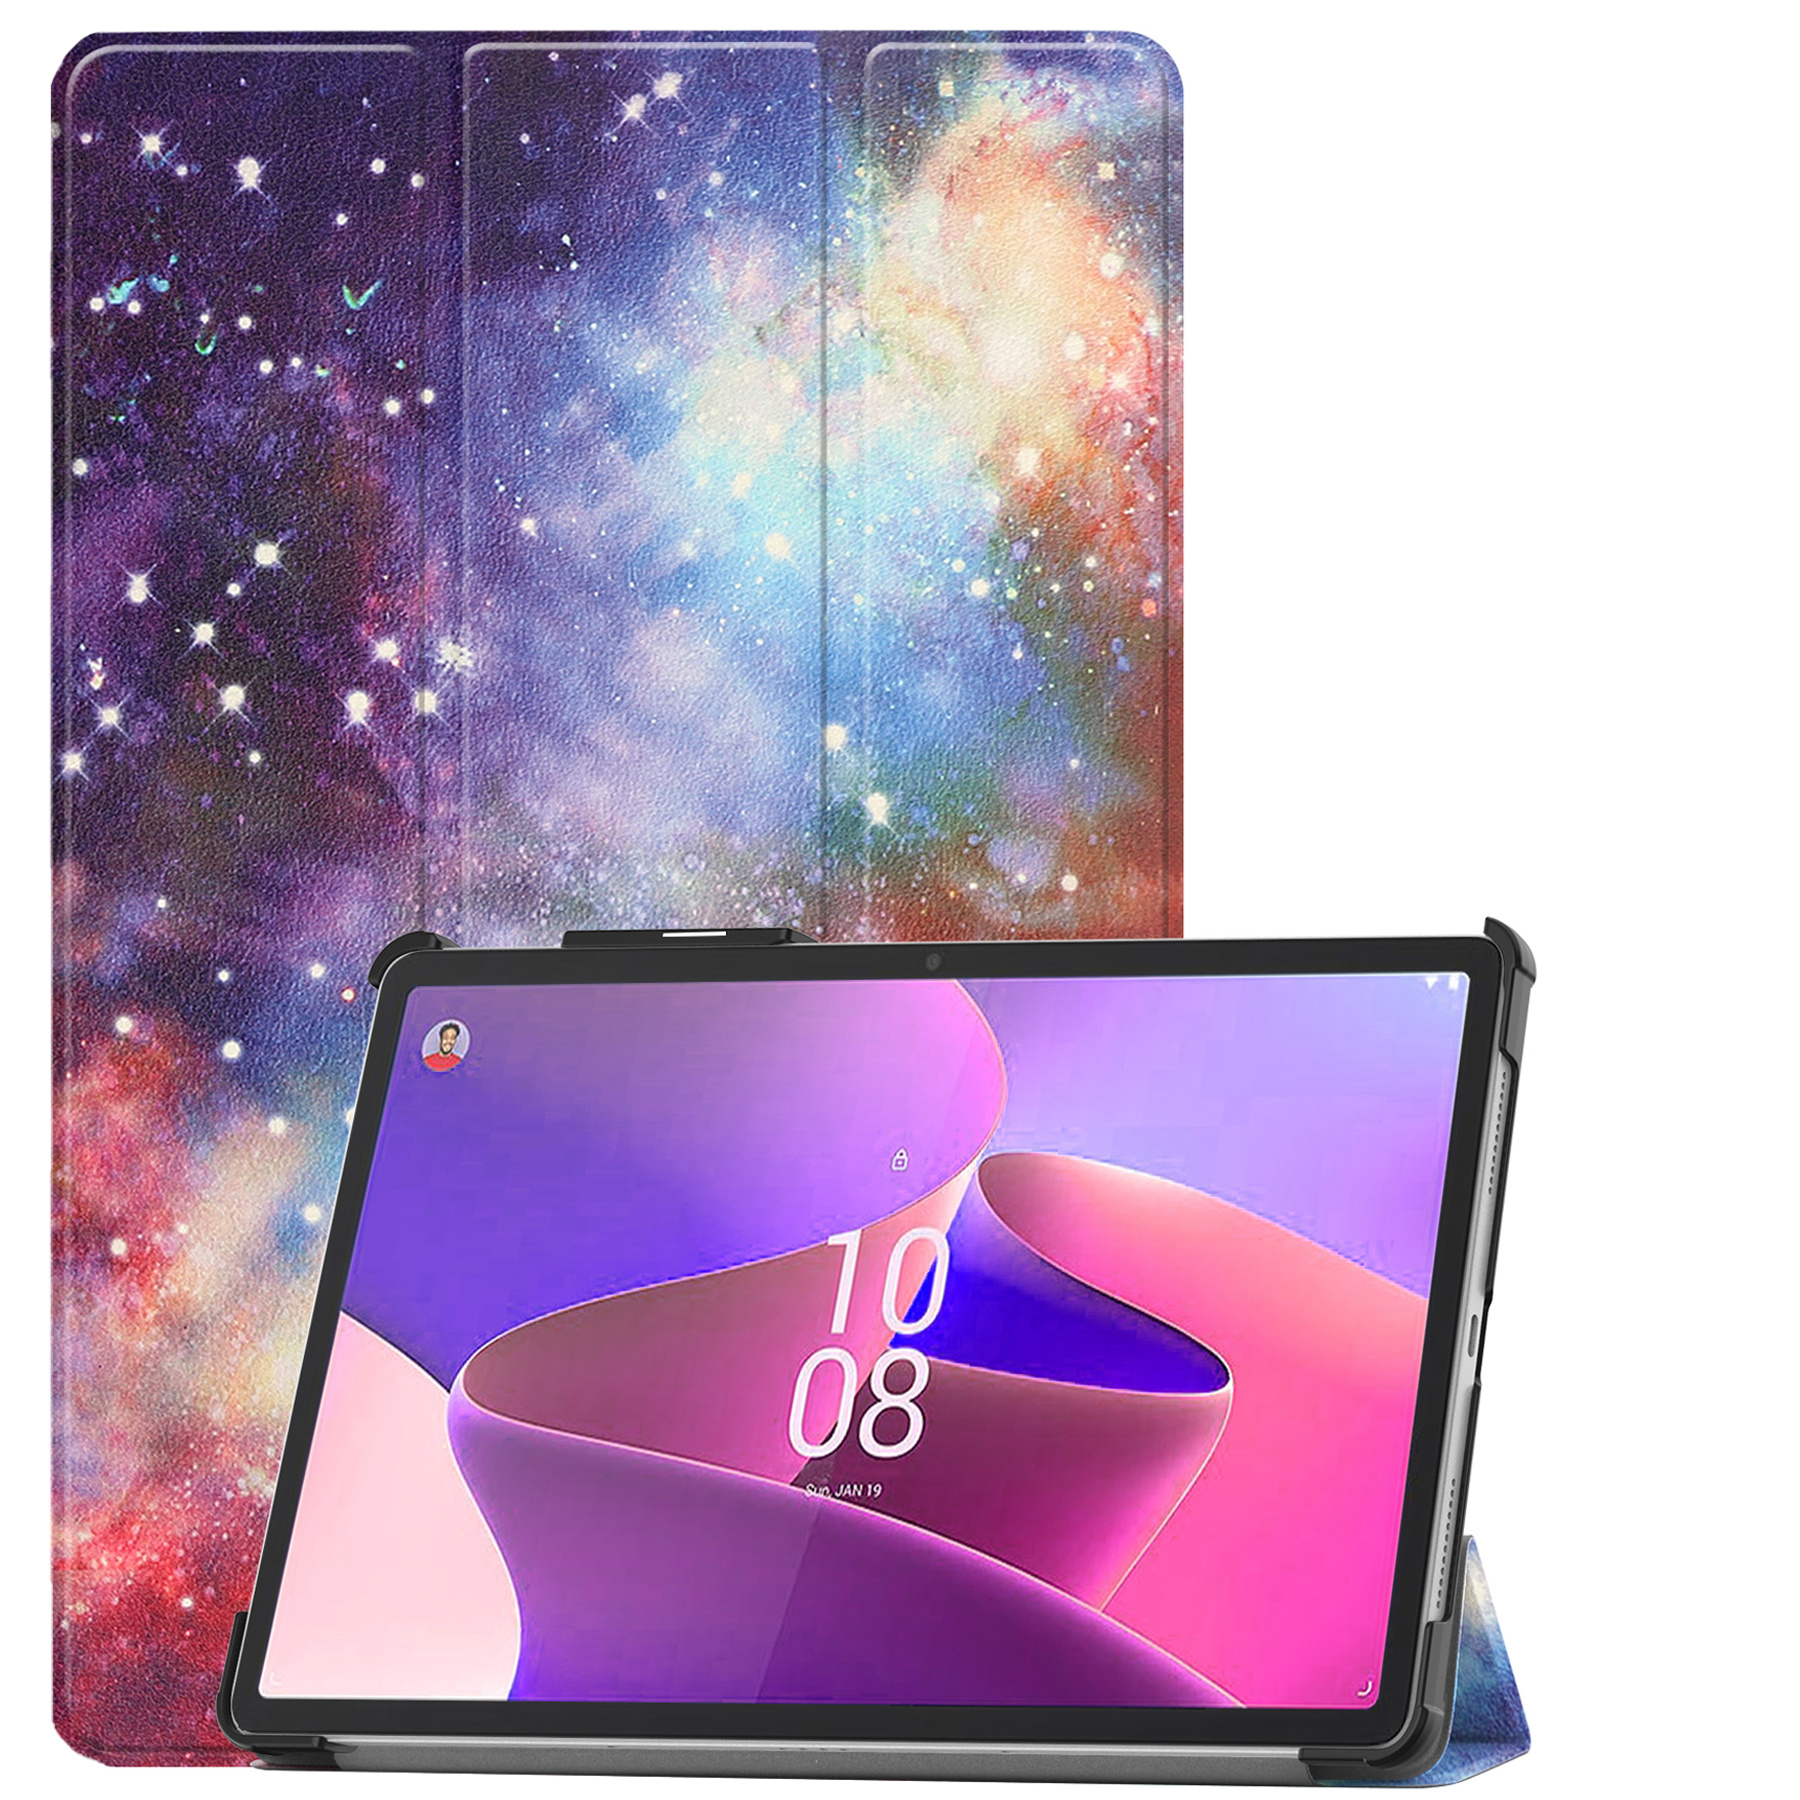 Nomfy Hoes Geschikt voor Lenovo Tab P11 Pro Hoes Tri-fold Tablet Hoesje Case Met Uitsparing Geschikt voor Lenovo Pen - Hoesje Geschikt voor Lenovo Tab P11 Pro Hoesje Hardcover Bookcase - Galaxy